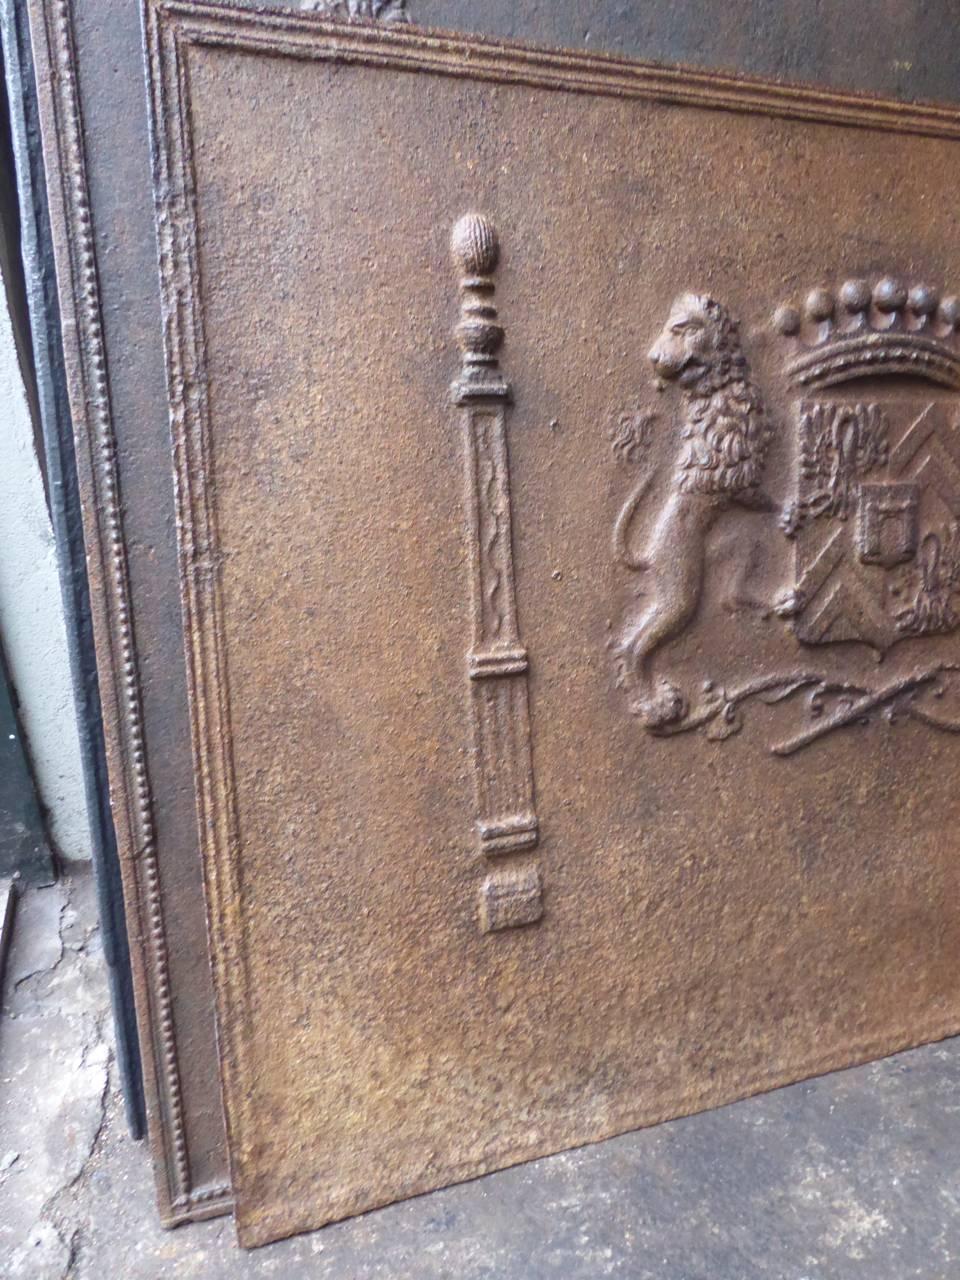 19th century French fireback with a coat of arms and two pillars.

The style of the fireback is neoclassical as shown by the pillars. The fireback was produced in that style period. But the coat of arms is definitely from a style period prior to